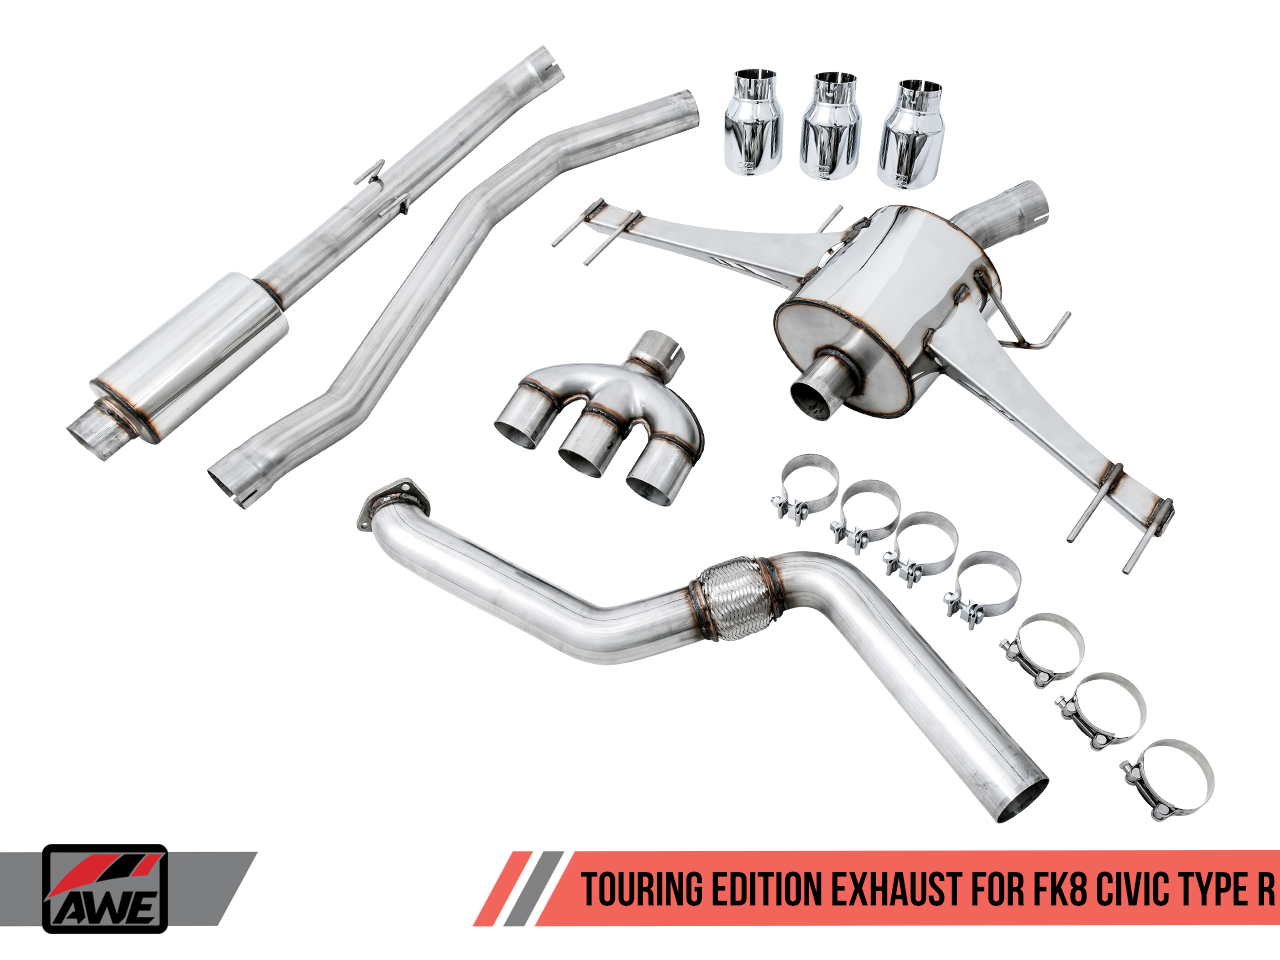 AWE Touring Edition Exhaust for FK8 Civic Type R (includes Front Pipe) - Chrome/ Black Tips